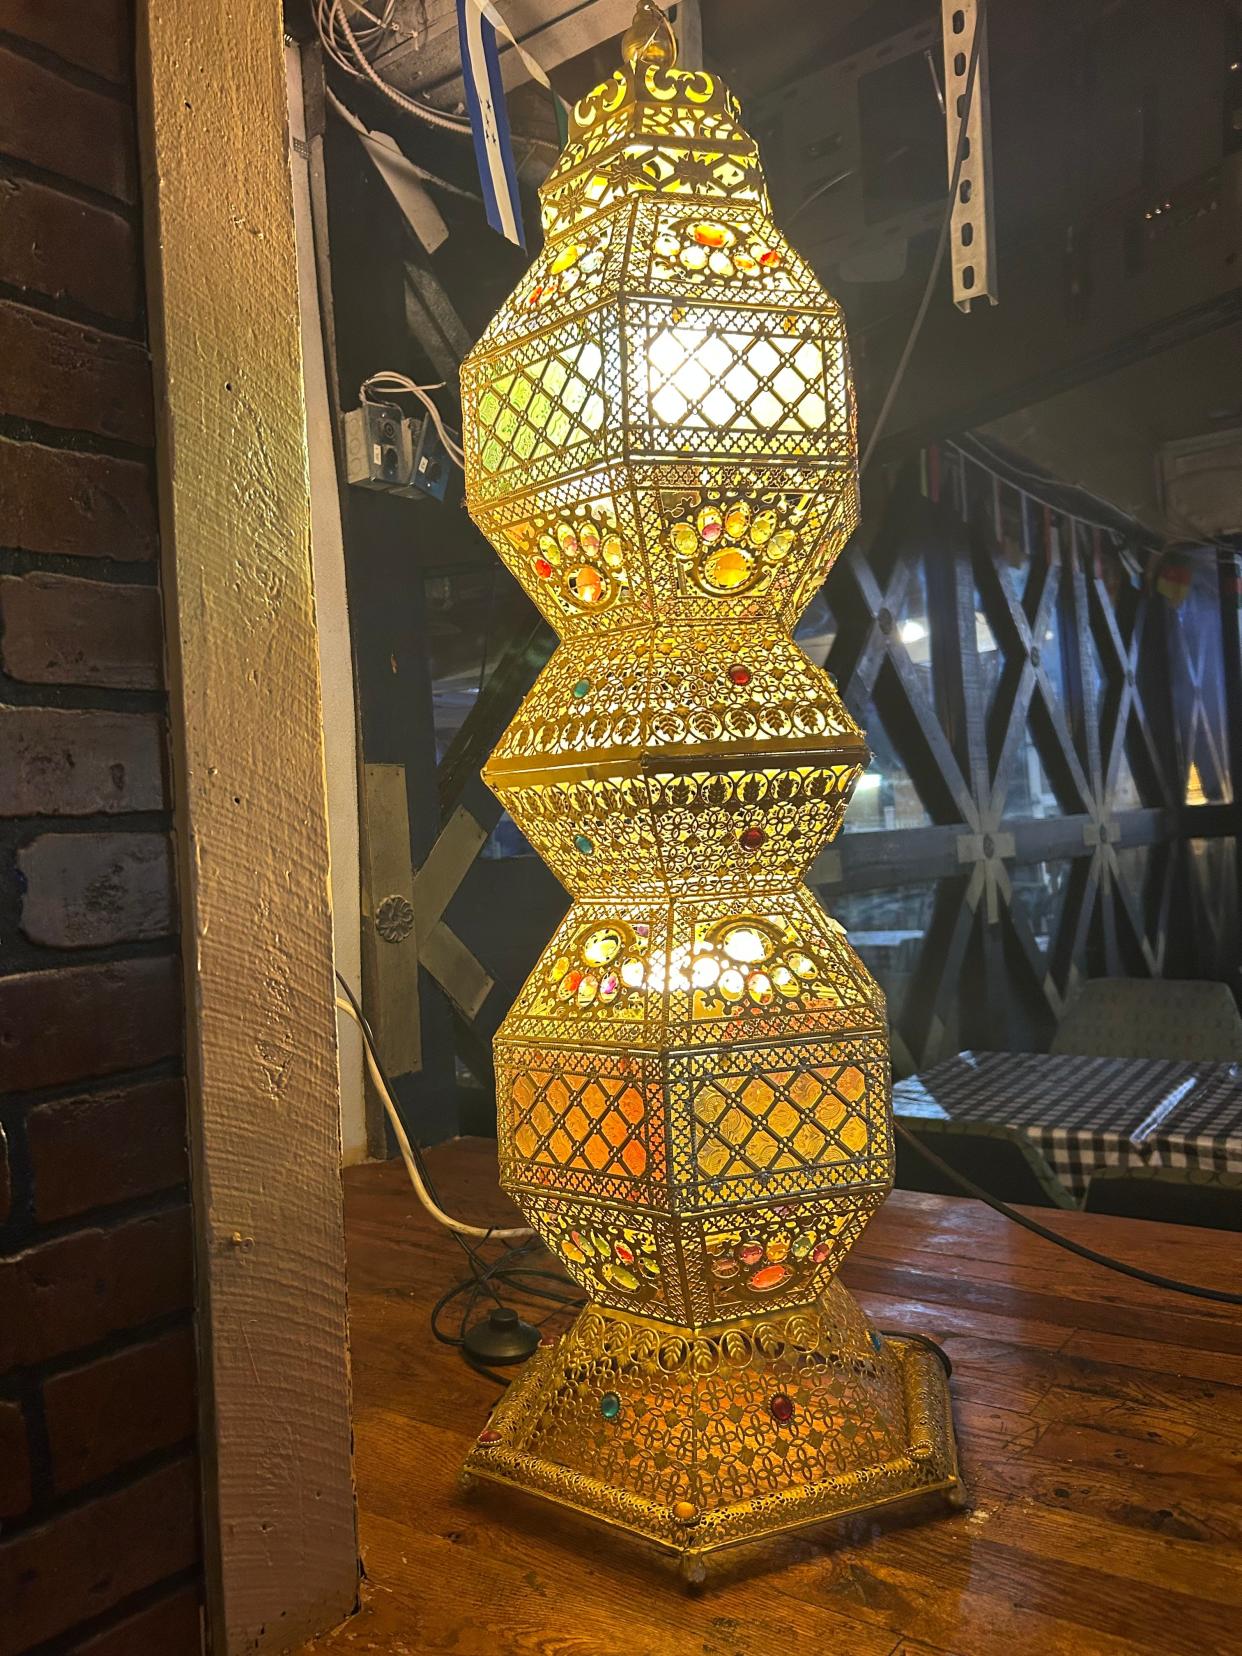 A decorative lamp at Mid-East Cafe and Restaurant near the University of Akron.